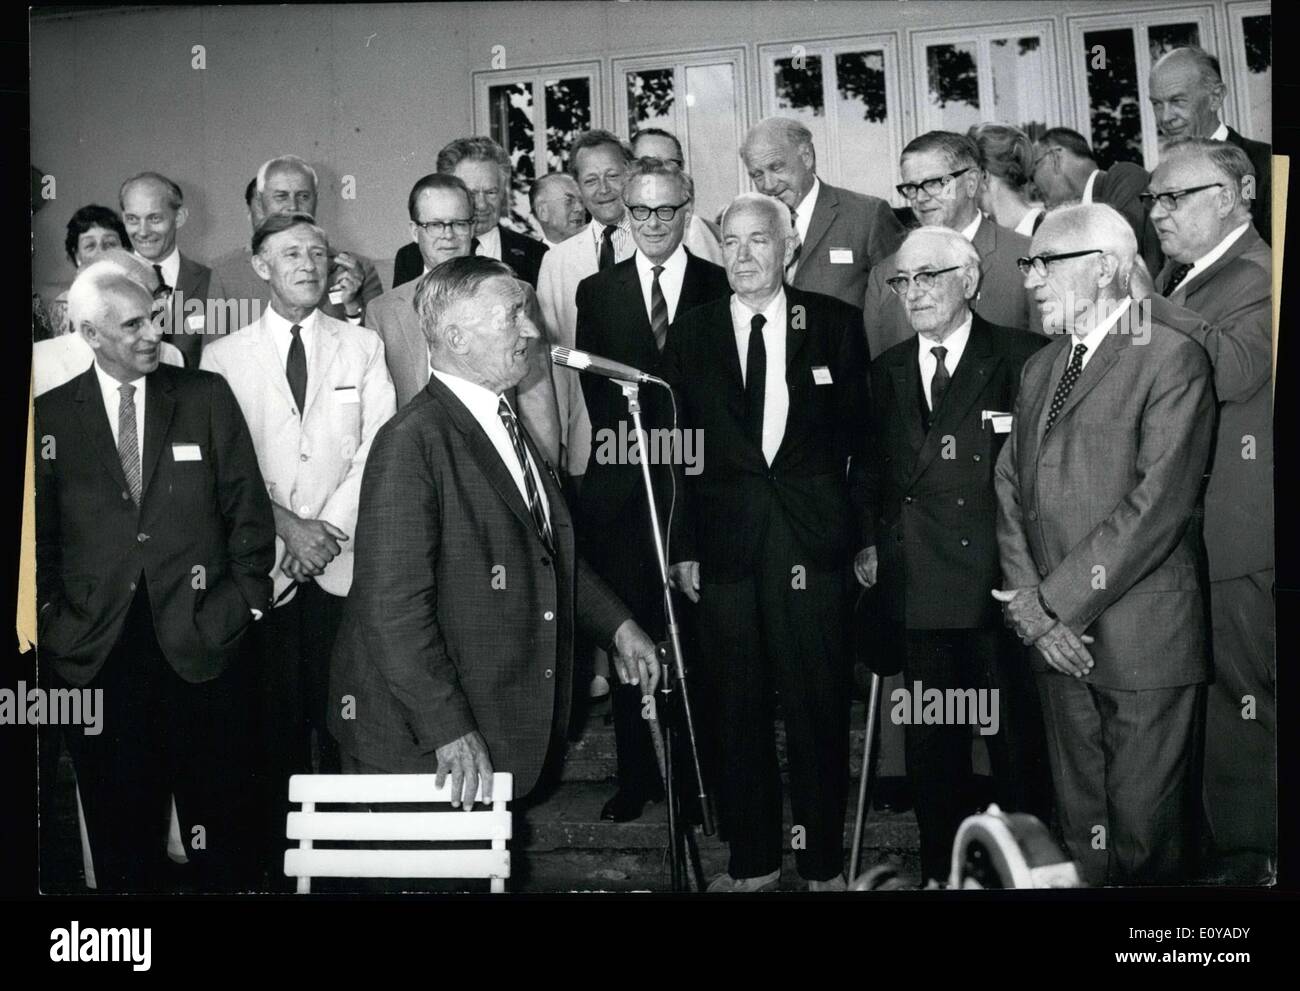 Jul. 02, 1969 - In the presence of twenty Nobel Prize winners from the USA, Sweden, England, Australia, and Germany Graf Lennart Bernadotte opened the 19th Nobel Prize Winners Convention in Lindau on June 30th. The convention should last until July 4. Fourteen prize winners will present their research findings, and the Bavarian Prime Minister Alfons Goppel, Vienna Archbishop Cardinal K?nig, respresentatives of local governments, foreign ambassadors, and over 250 students from both domestic and foreign universities will be in attendance Stock Photo